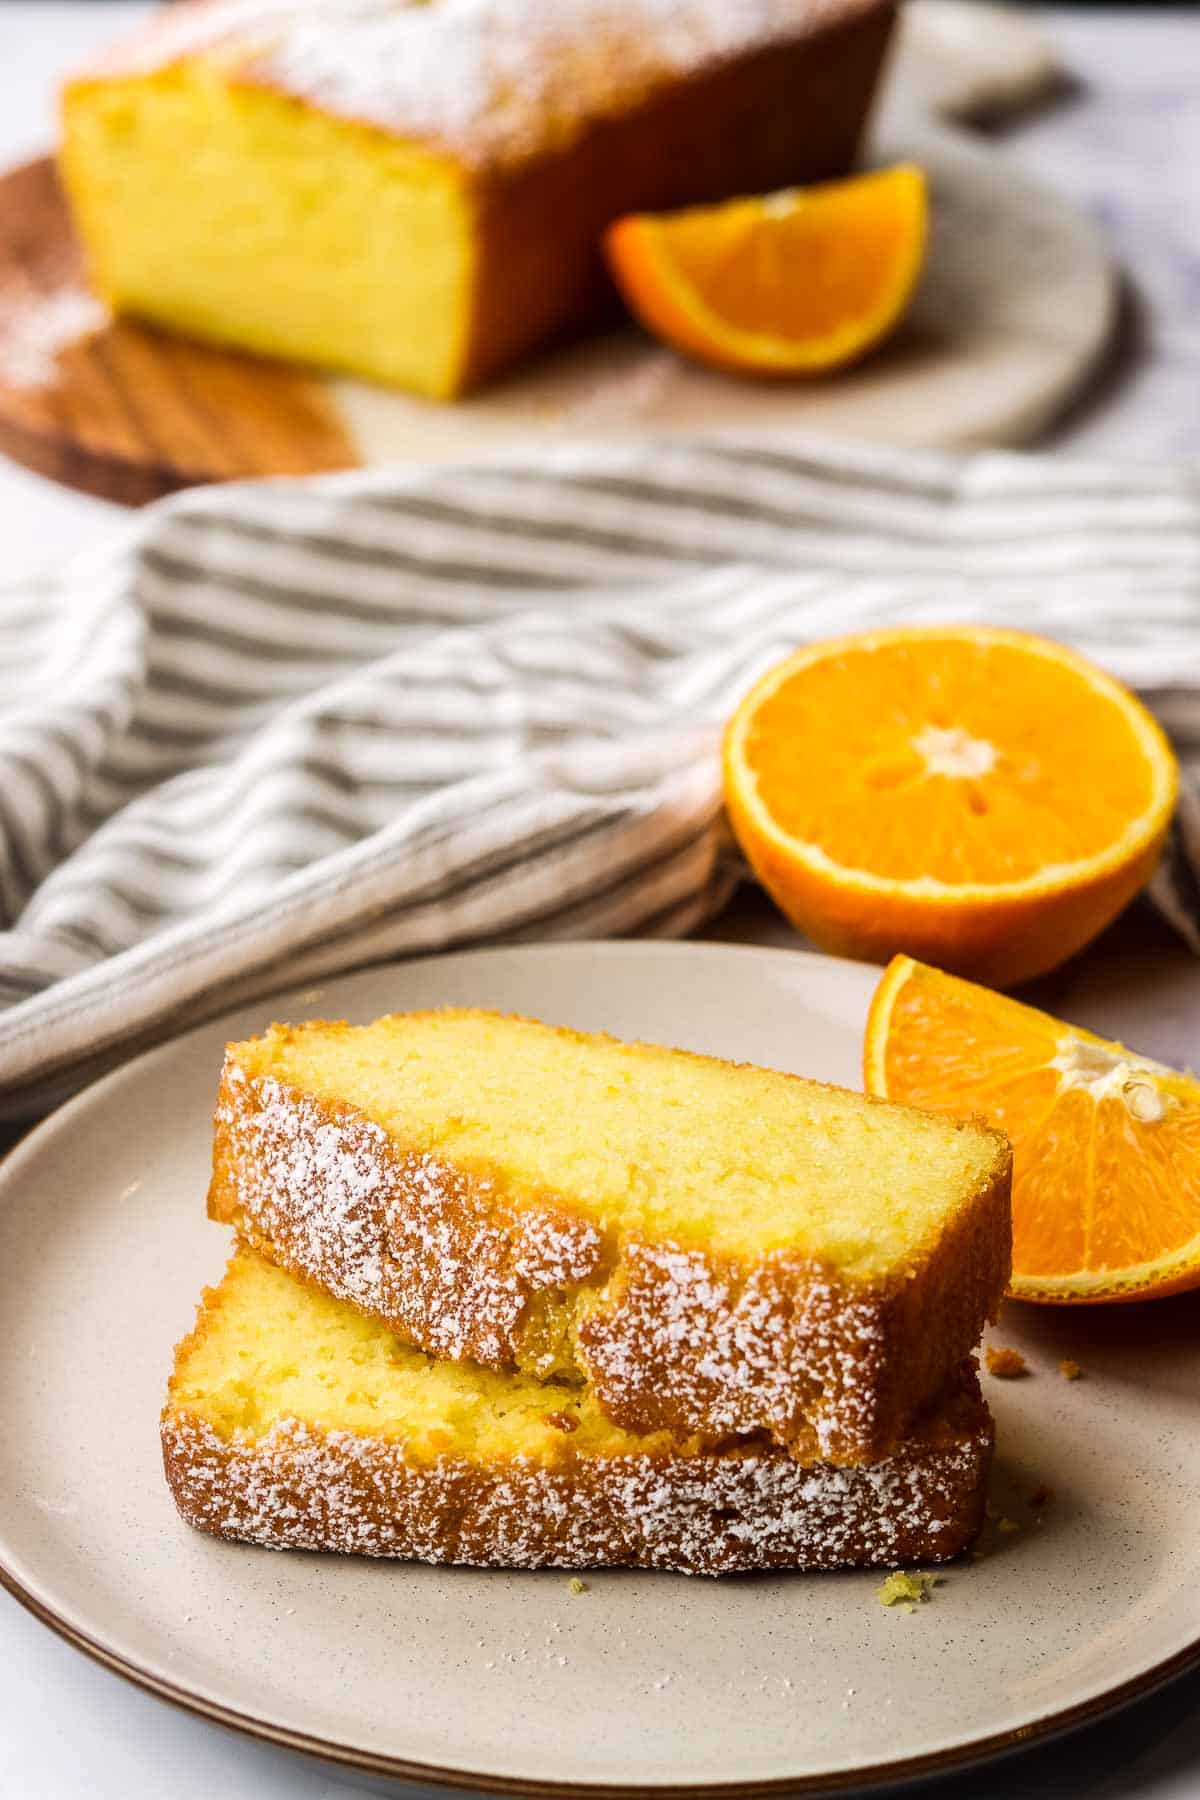 Two slices of orange loaf cake on a small place with orange wedges and halves in the background.